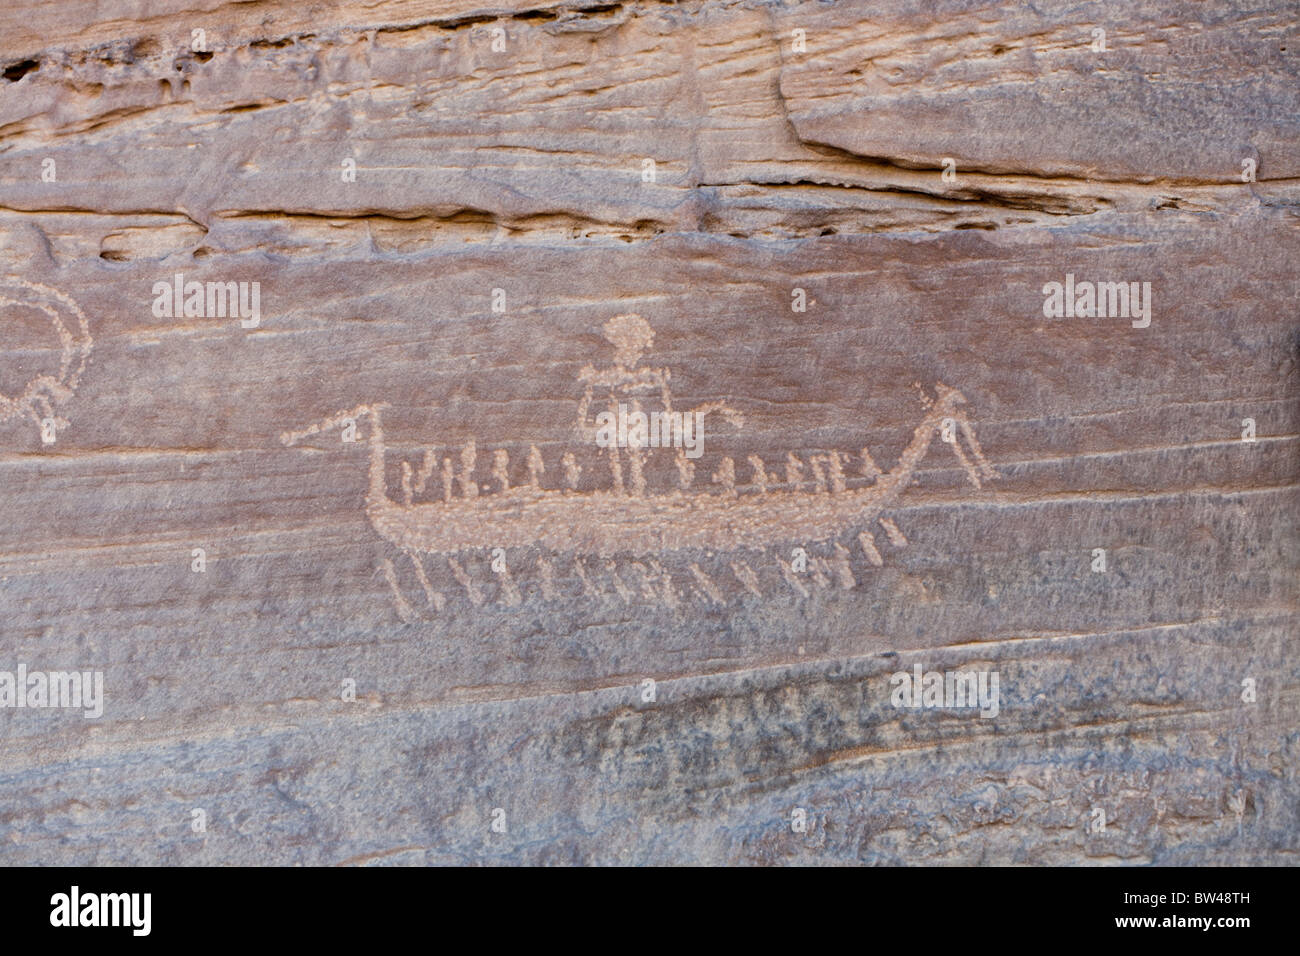 Petroglyph of high prowed boat with crew and chief in the Wadi Umm Salam in Egypt's Eastern Desert Stock Photo